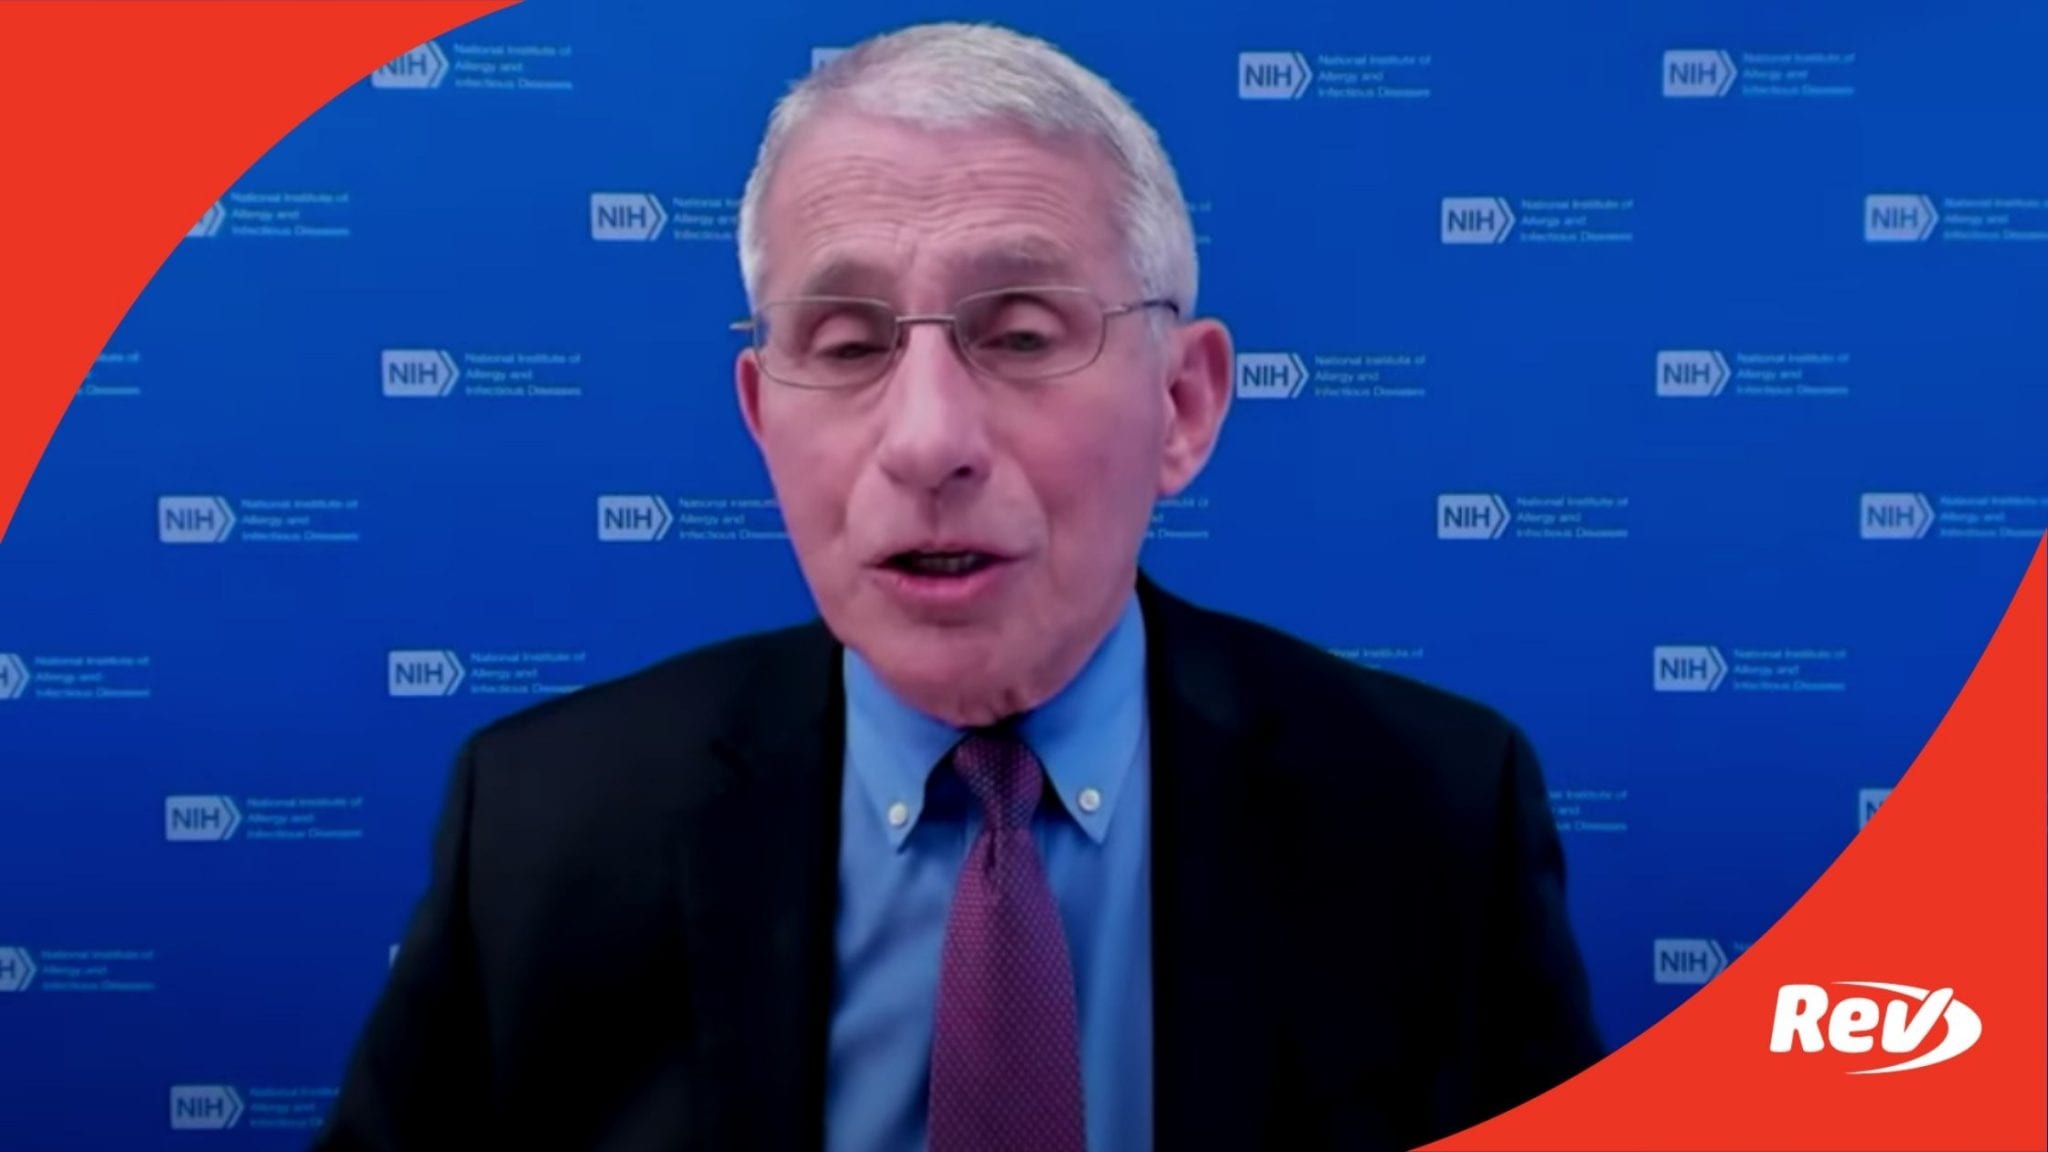 White House COVID-19 Task Force, Dr. Fauci Press Conference Transcript March 5